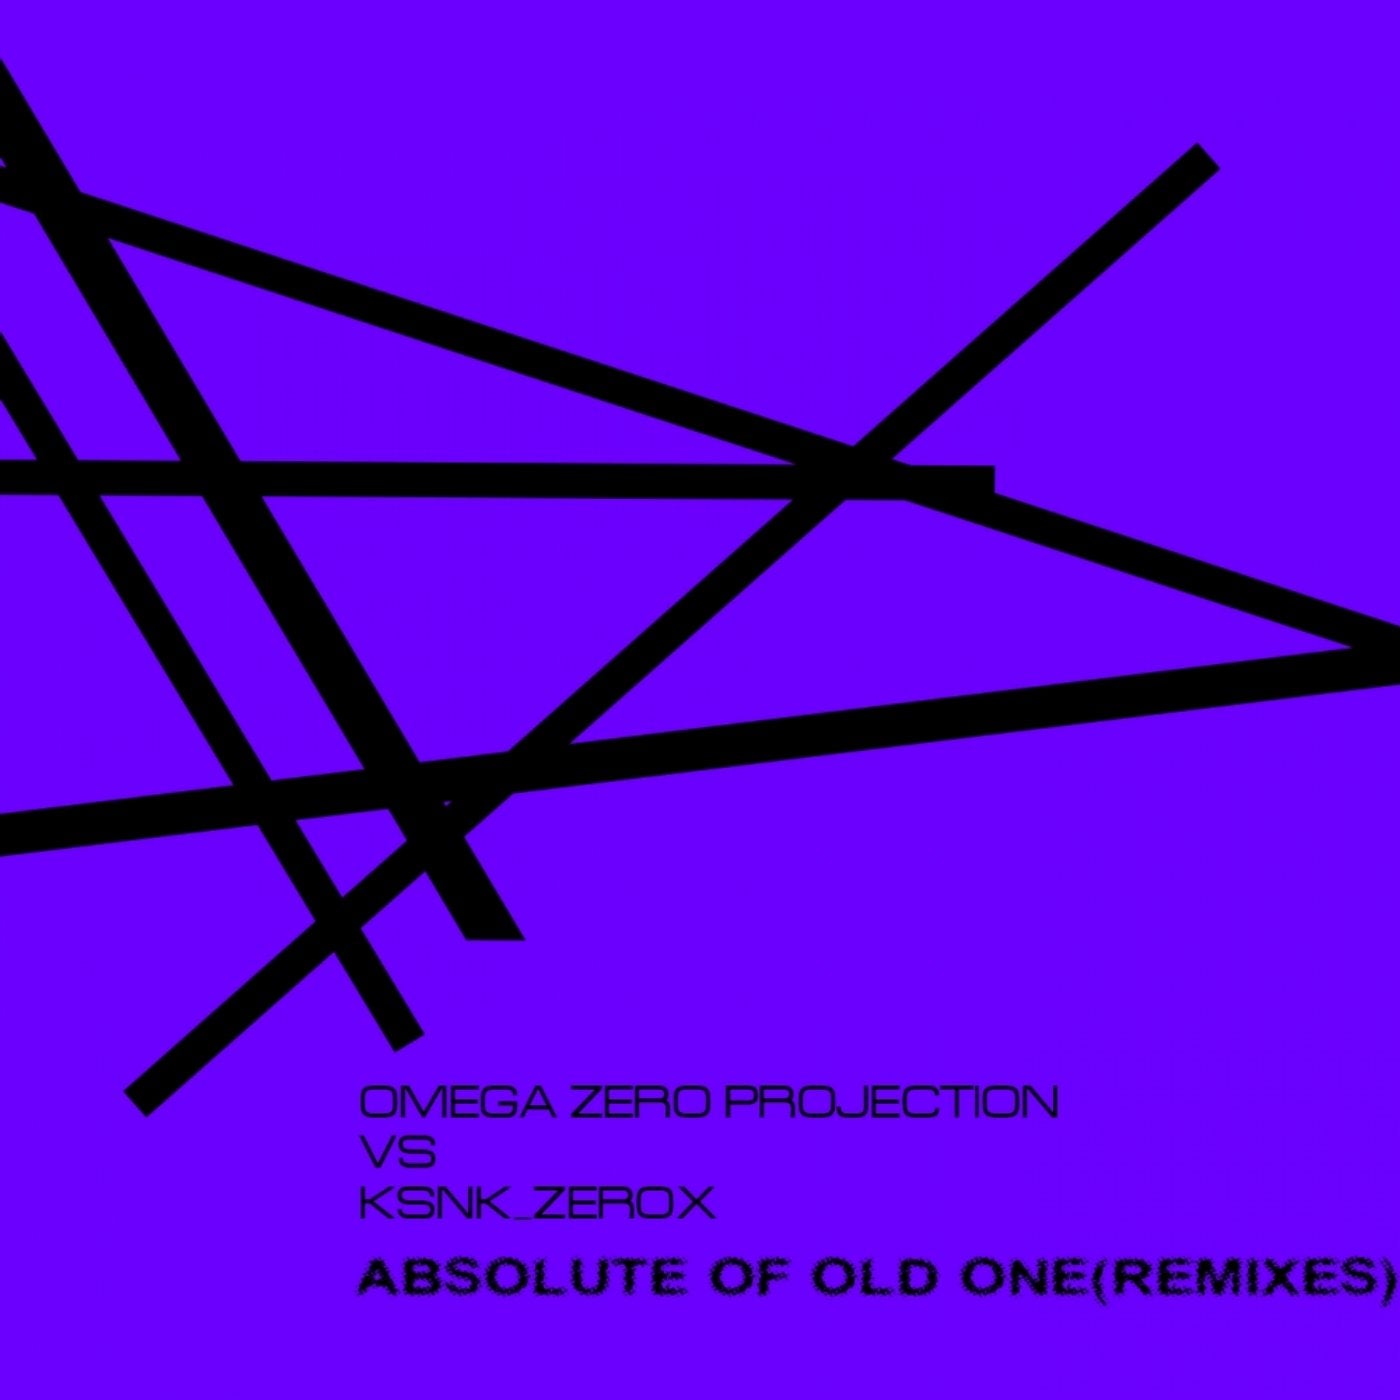 Absolute of Old One (Remixes)